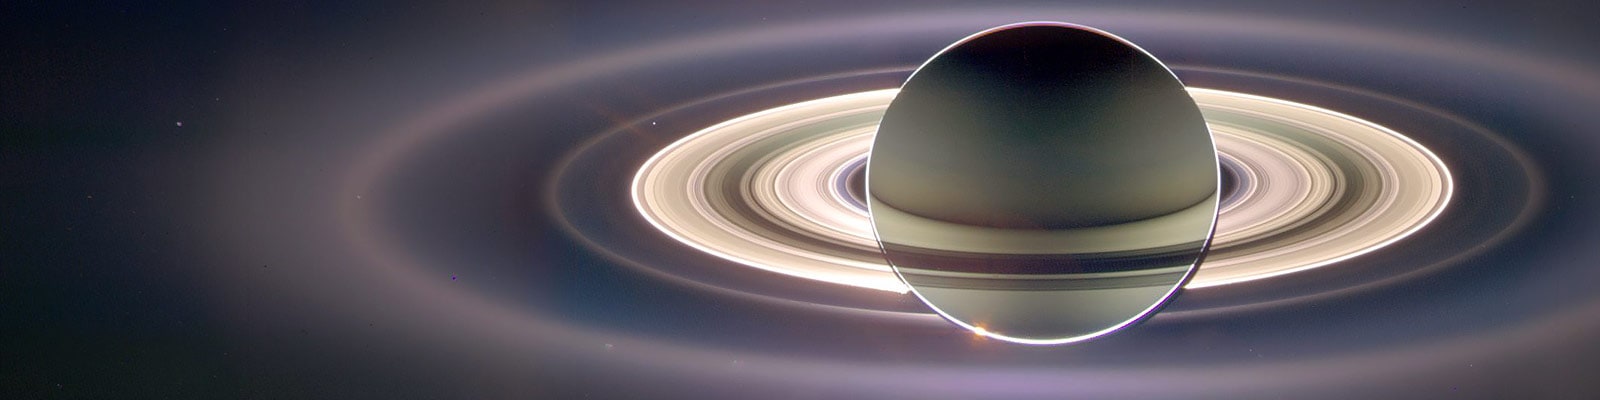 The planet Saturn with it's rings.